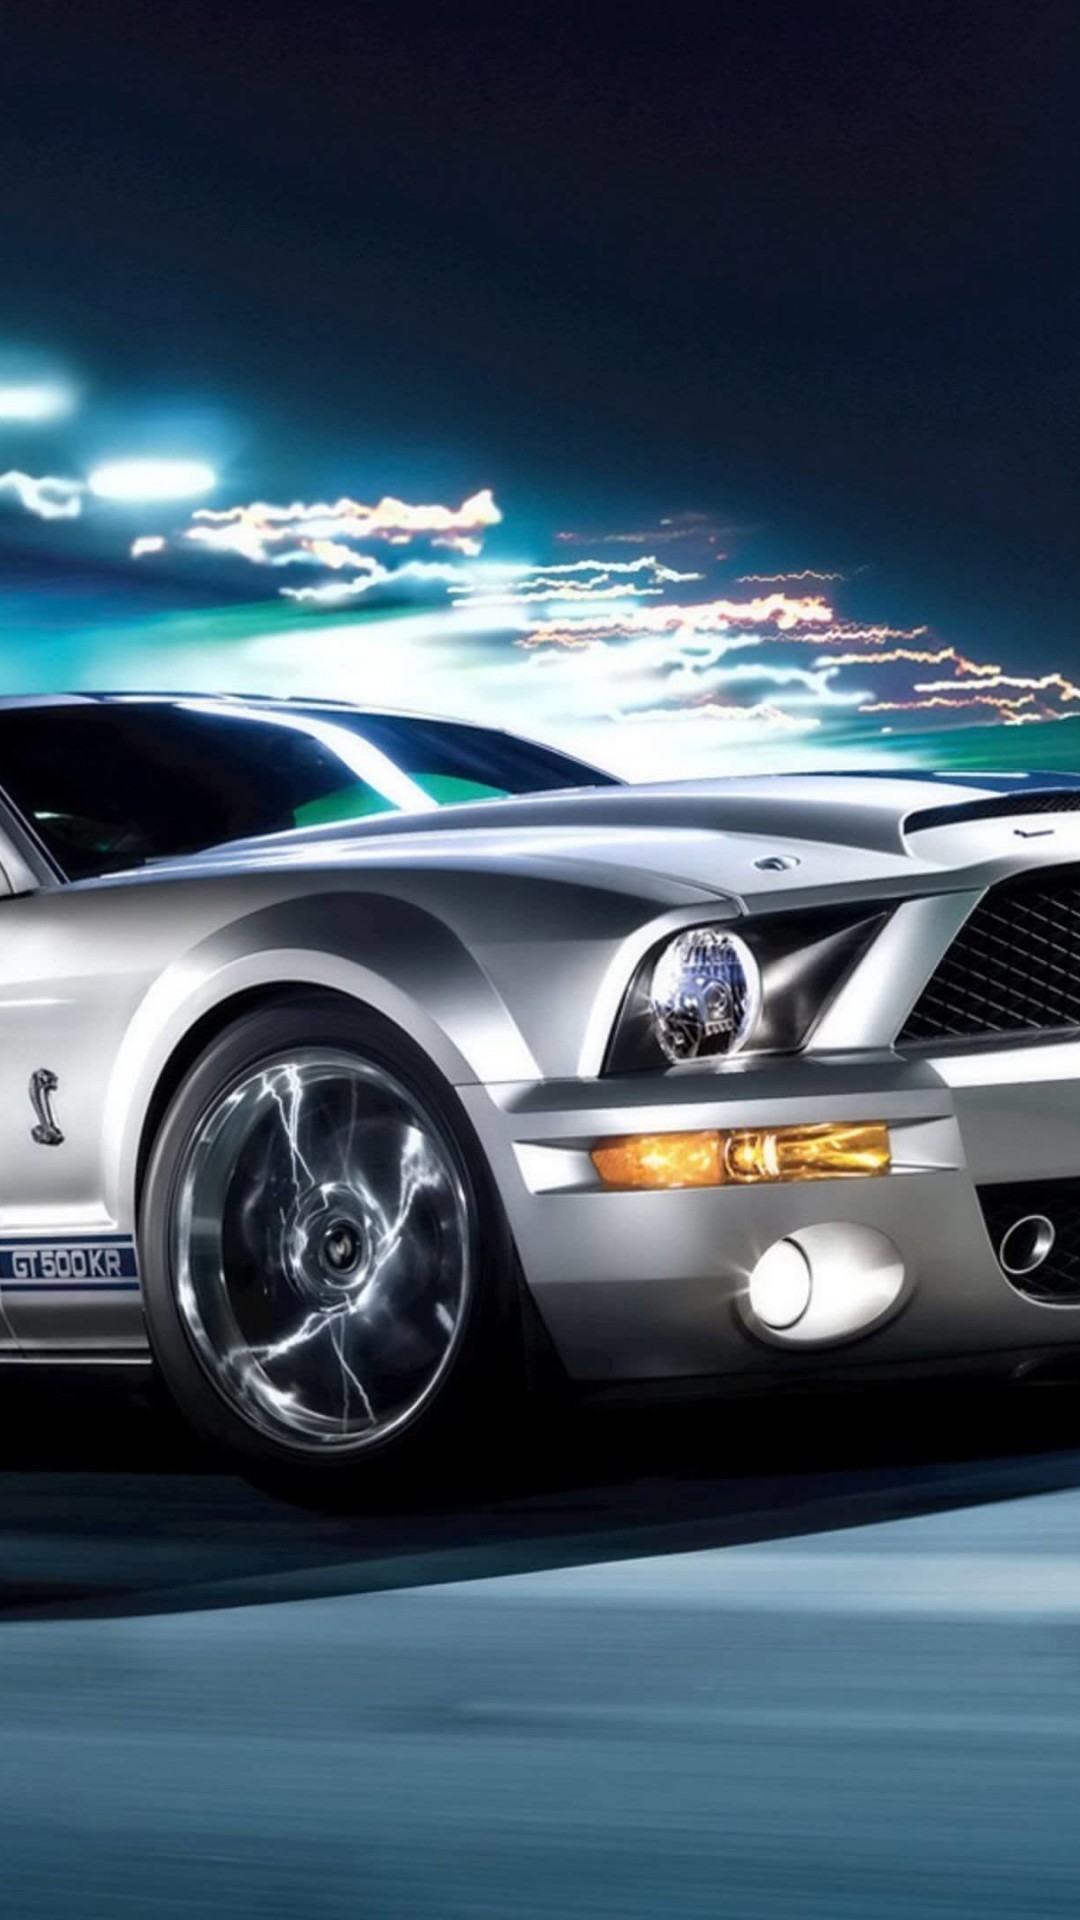 Ford Mustang Shelby GT500KR Wallpaper for SAMSUNG Galaxy S4